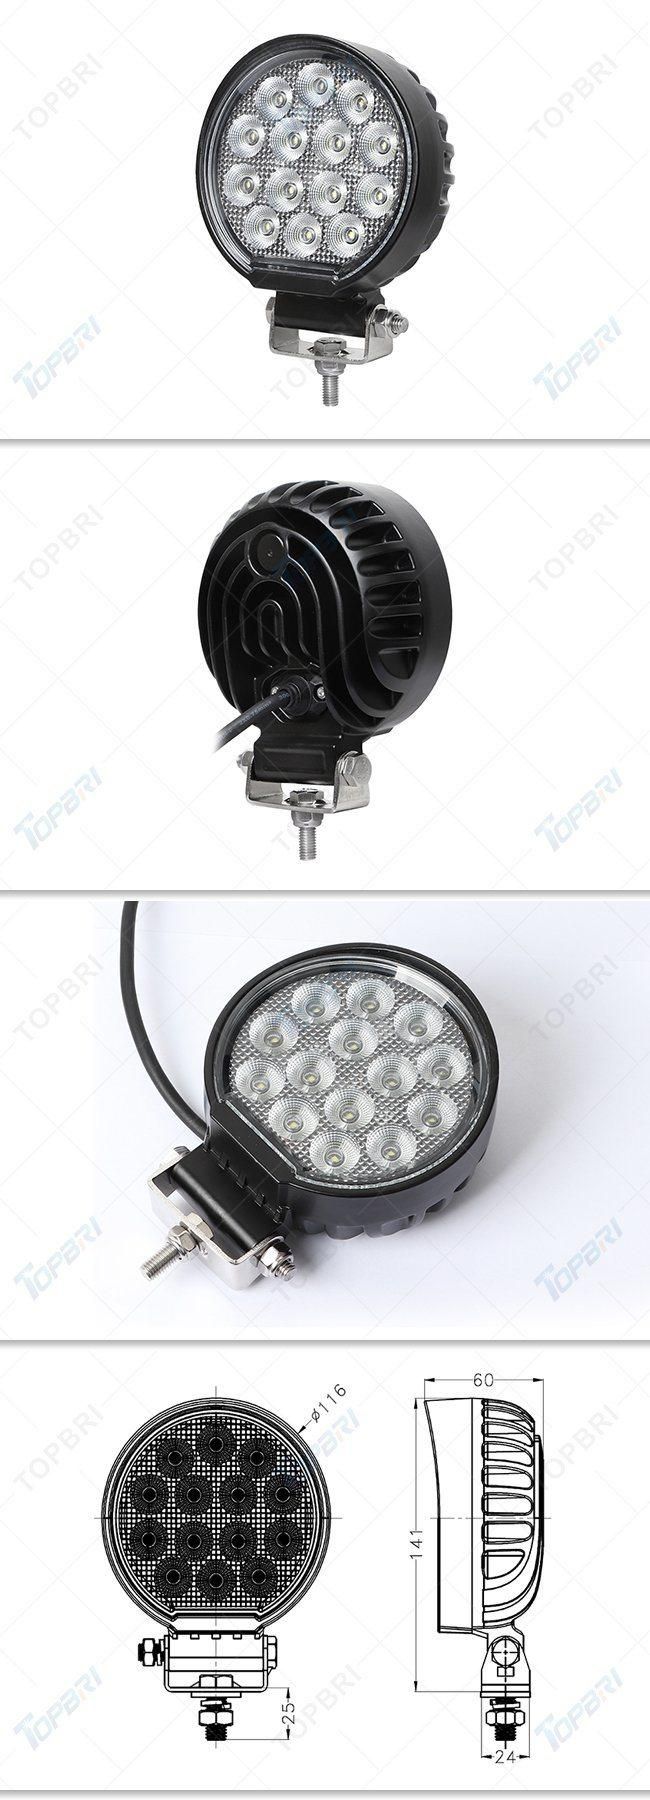 Mini 42W LED Work Light for Motorcycle Truck Tractor Trailer 